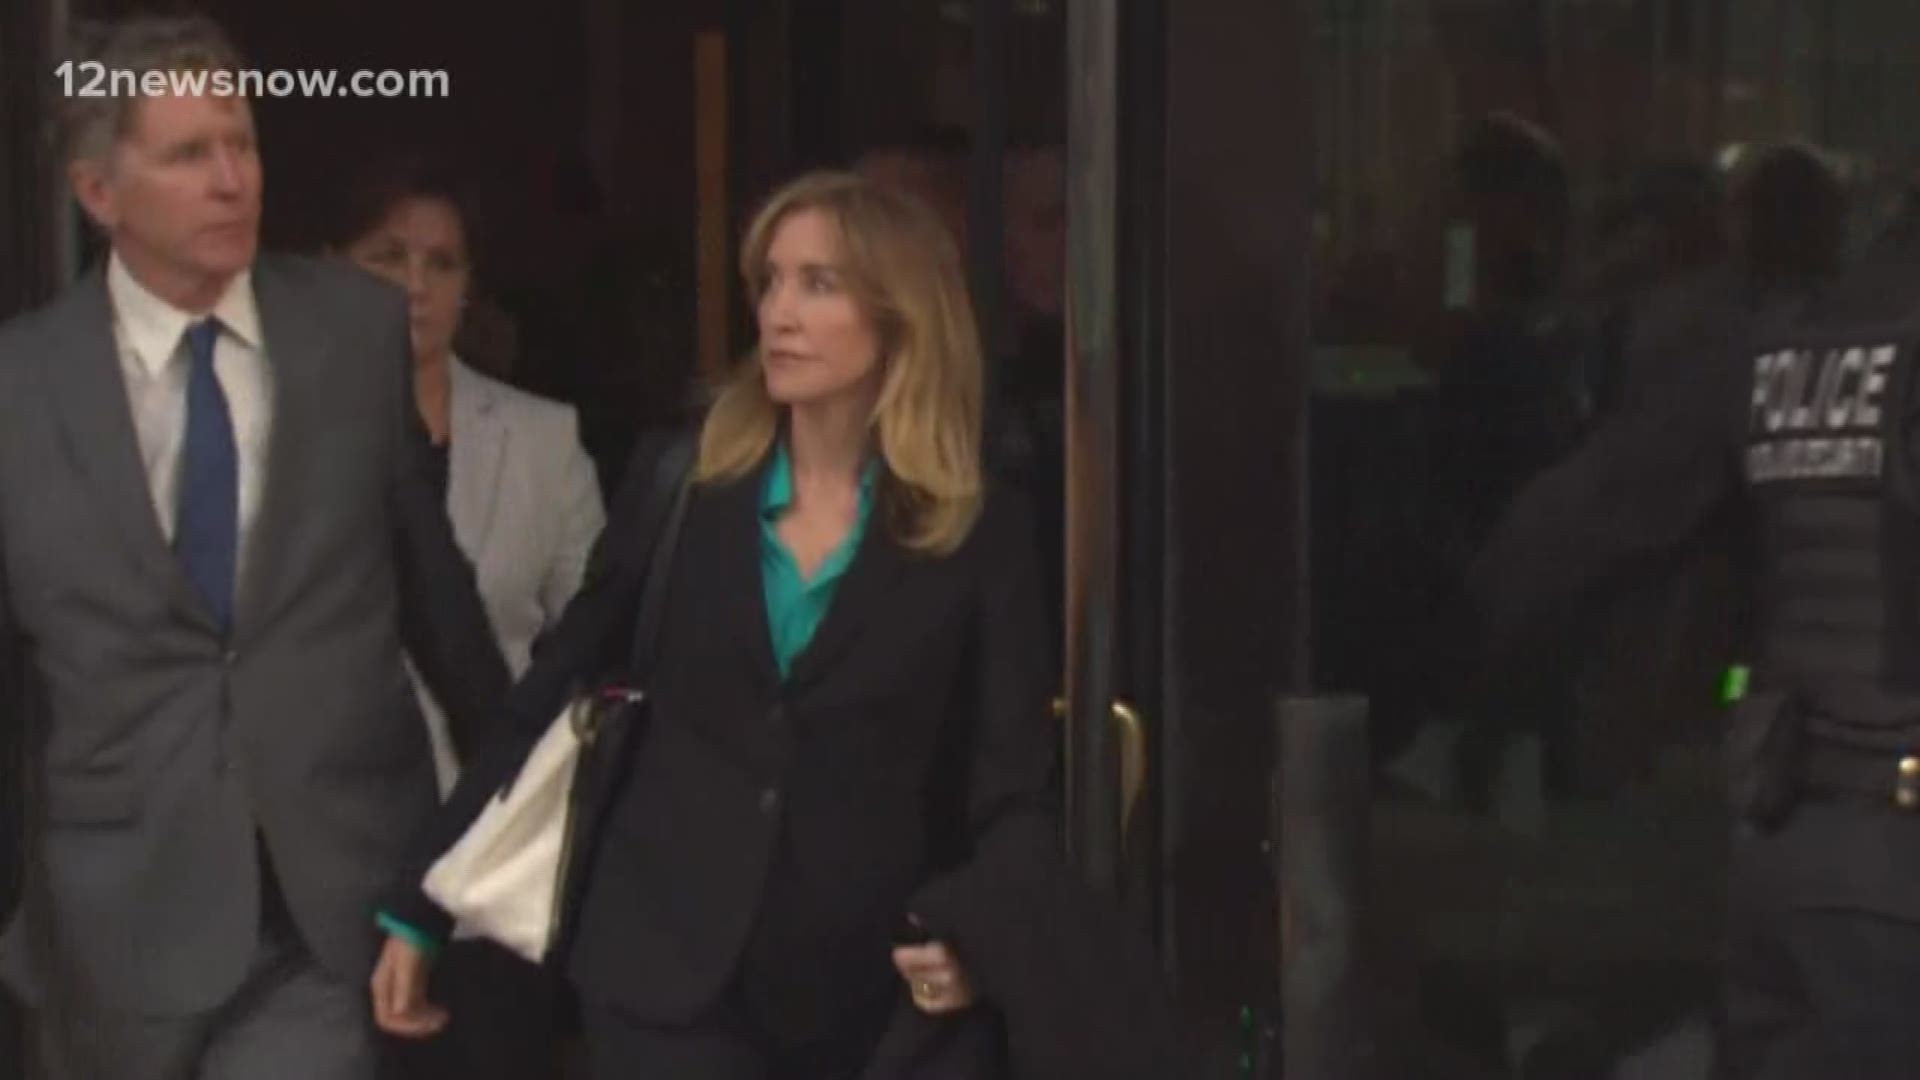 Actress Felicity Huffman is expected to plead guilty today for conspiracy to commit mail fraud in the college admissions scandal. Huffman is one of more than a dozen parents who admitted paying William Rick Singer to help get their children into elite colleges. Legal analysts say she is trying to cooperate with the government to get the lowest sentence possible.